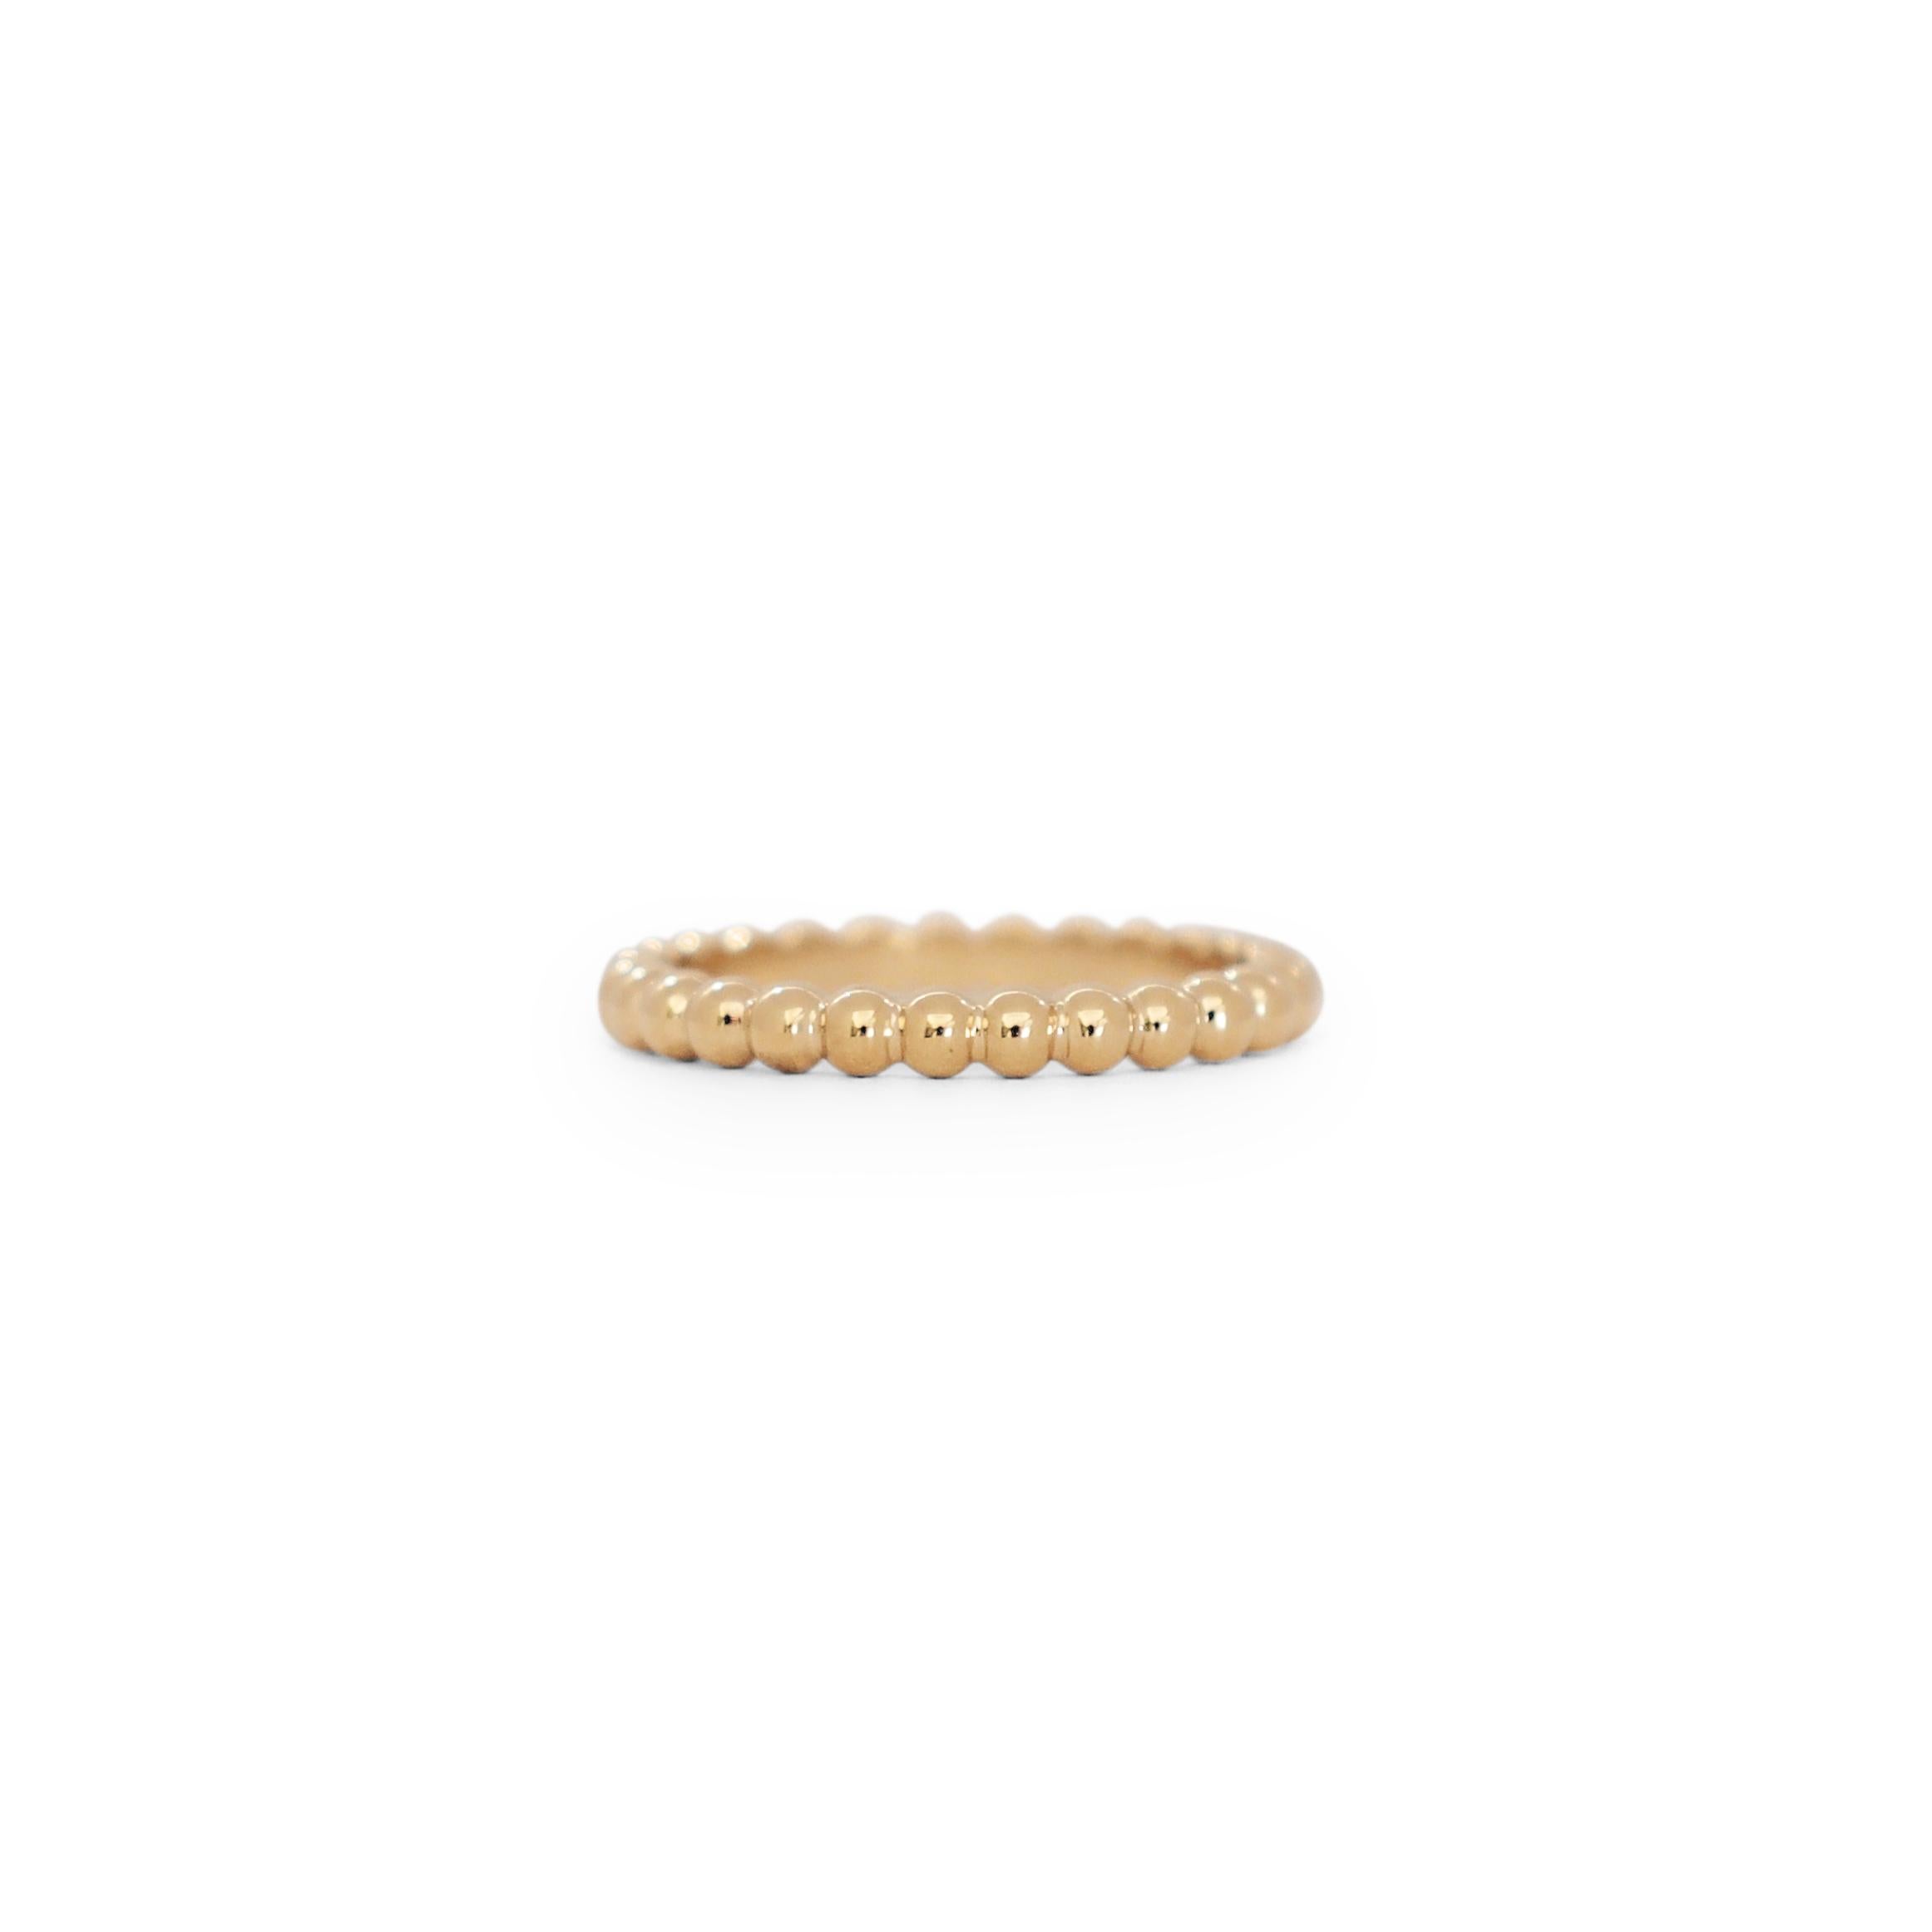 Authentic Van Cleef & Arpels 'Pearls of Gold Ring' from the Perlée collection.  The ring is comprised of a single row of beaded 18 karat yellow gold finished with a high polish.  Size 59, US size 8 3/4.  Signed VCA, Au 750, 59, with serial number. 